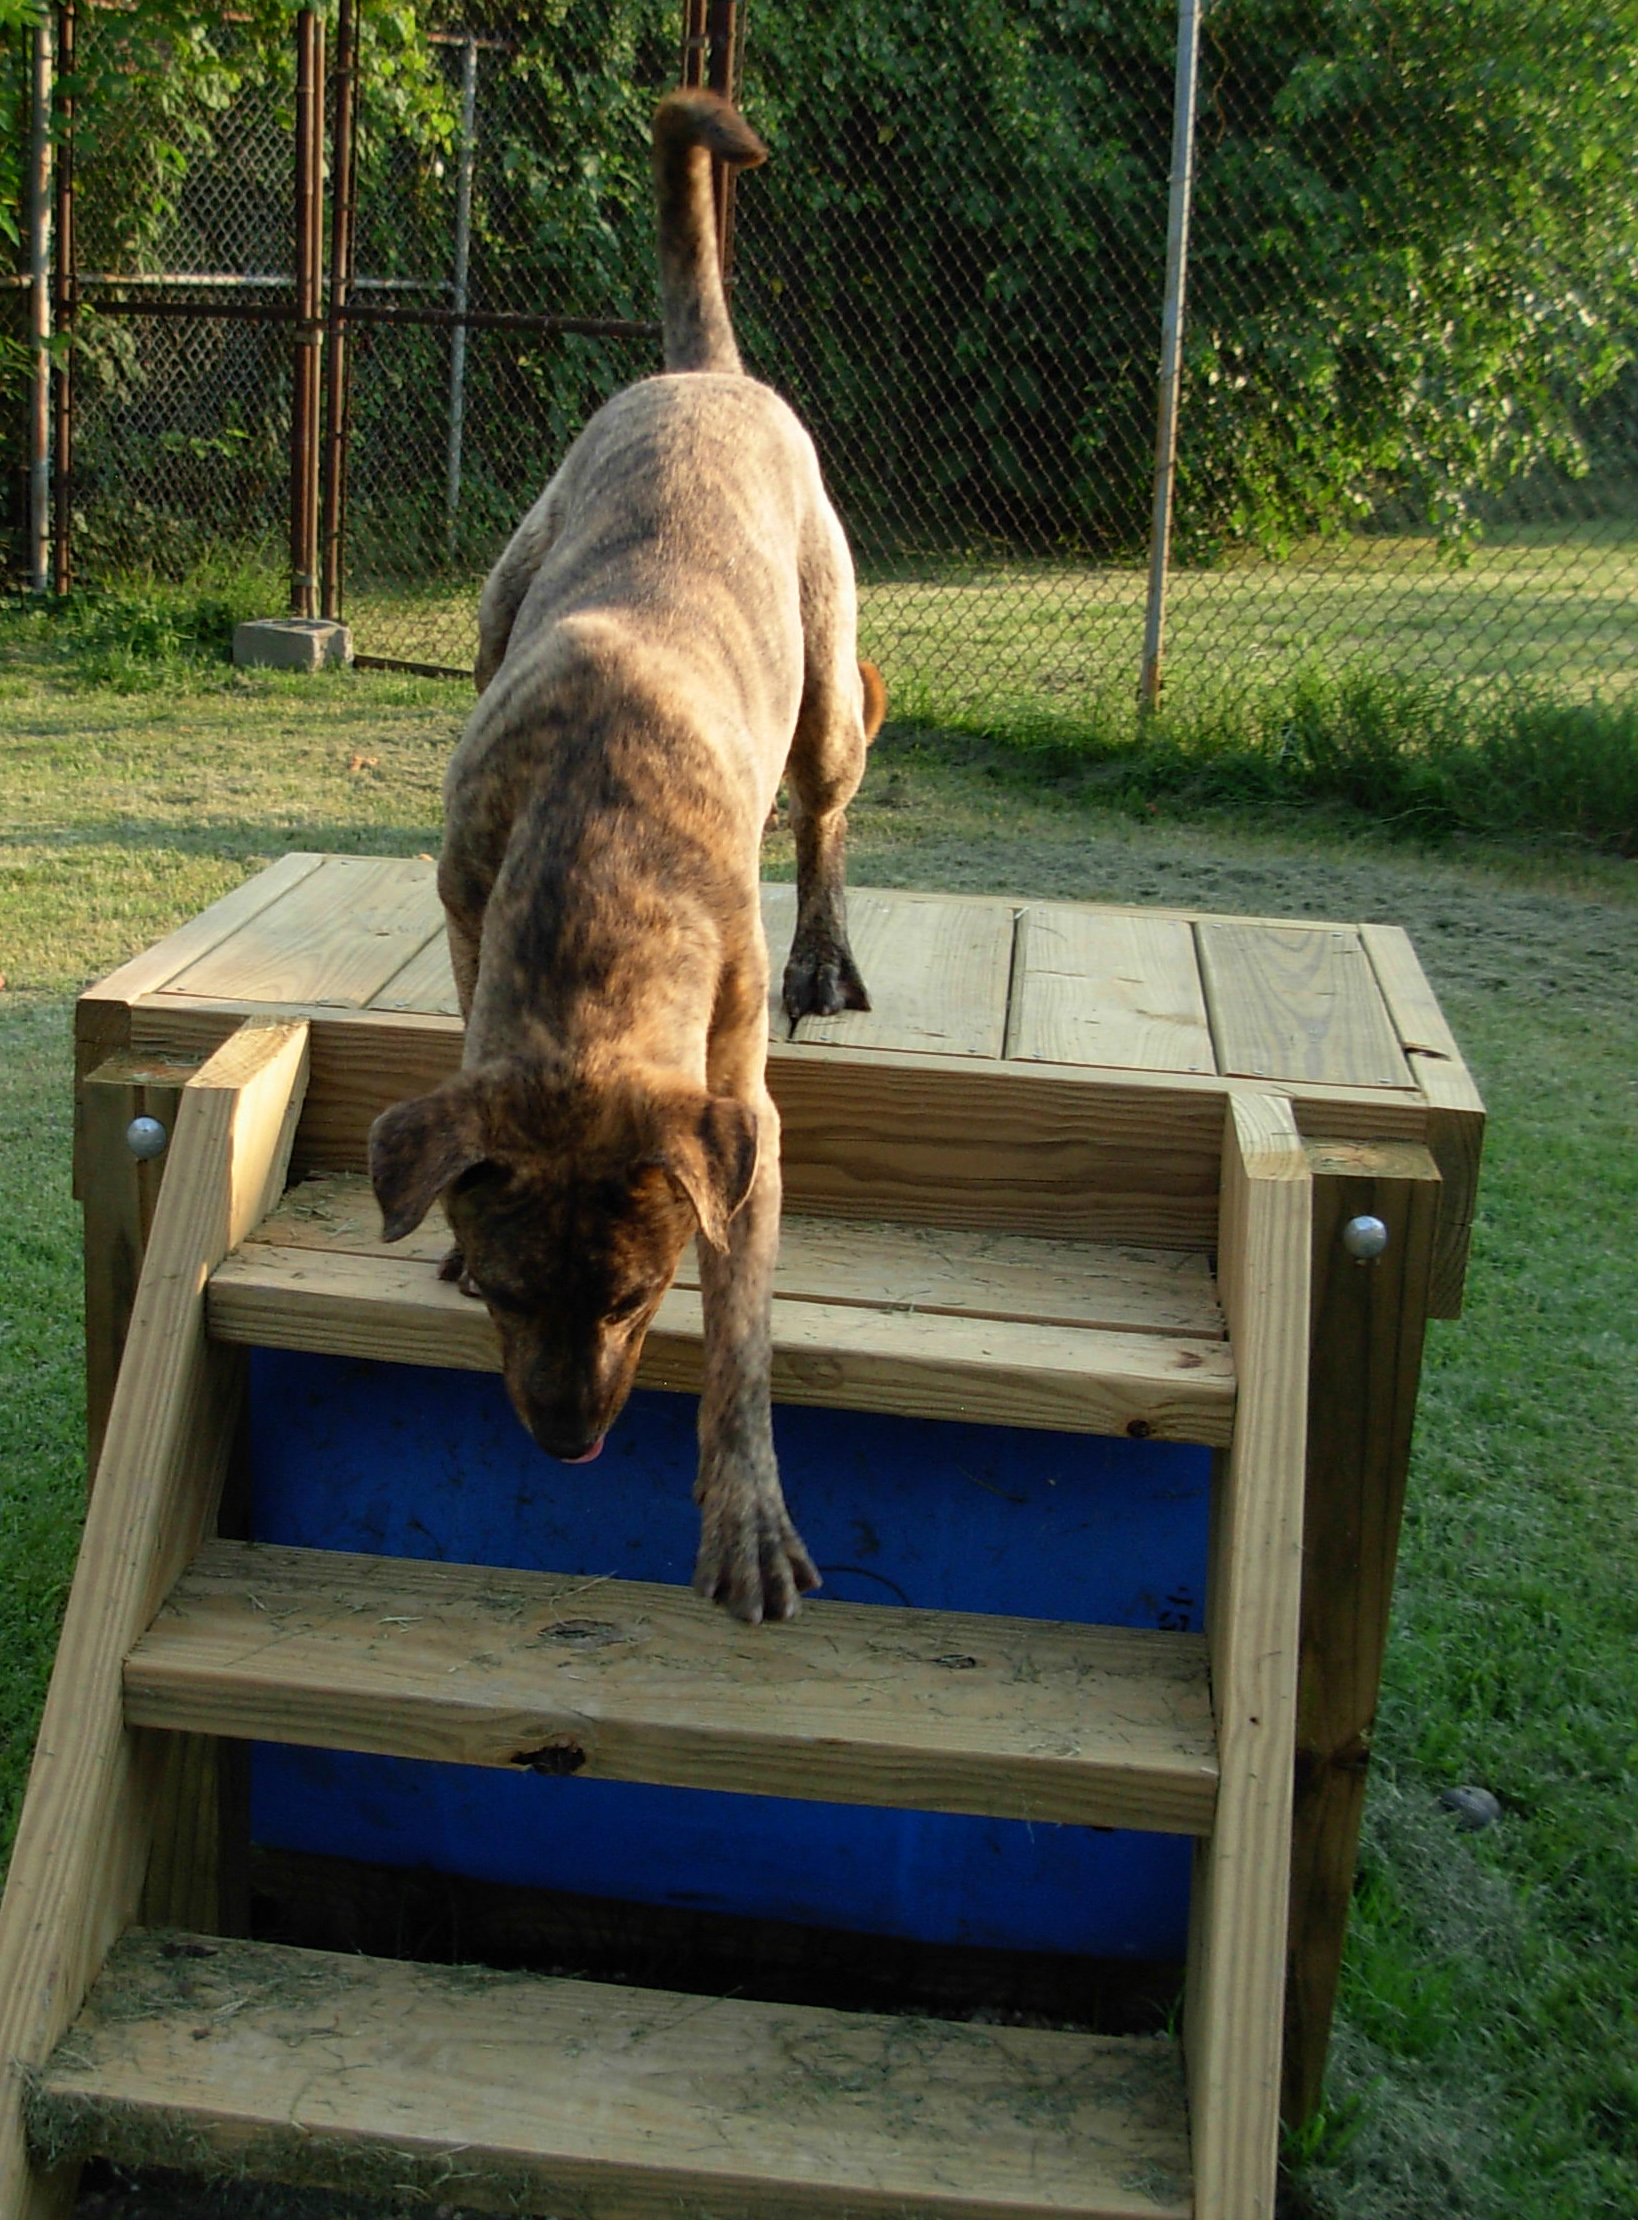 a dog standing on top of a wooden ramp in a grassy field